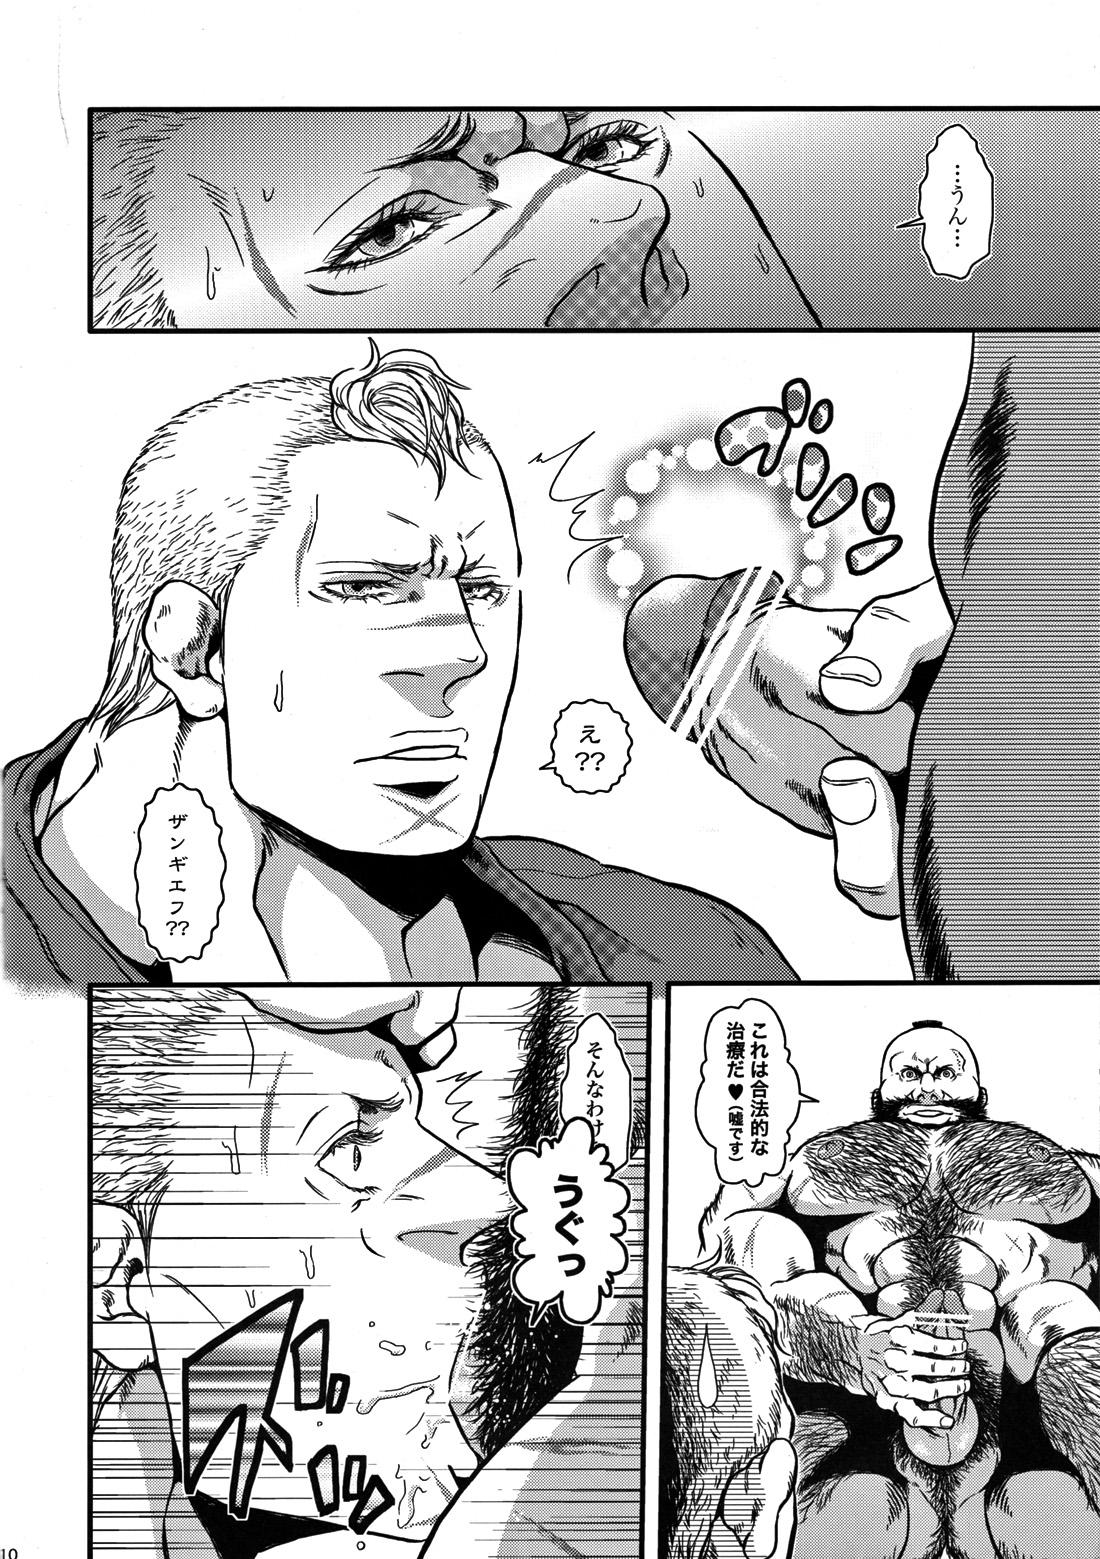 Blowing TOYED WITH FRENCH DOG - Street fighter Work - Page 9